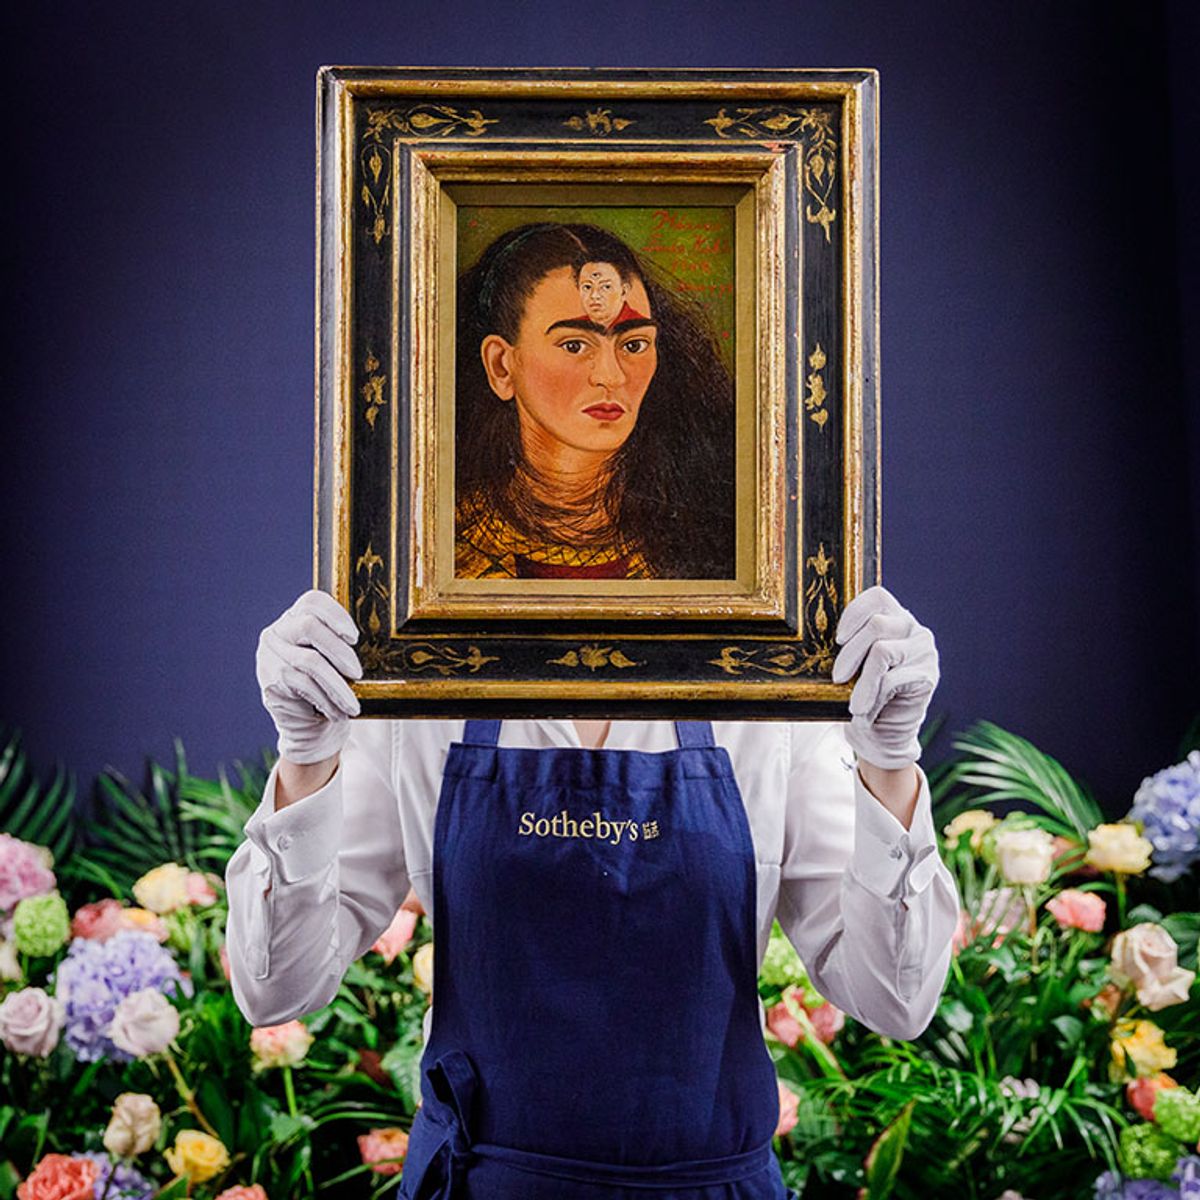 Frida Kahlo, Diego y yo (1949) is due to be auctioned in New York on 16 November Photo by Tristan Fewings/Getty Images for Sotheby's